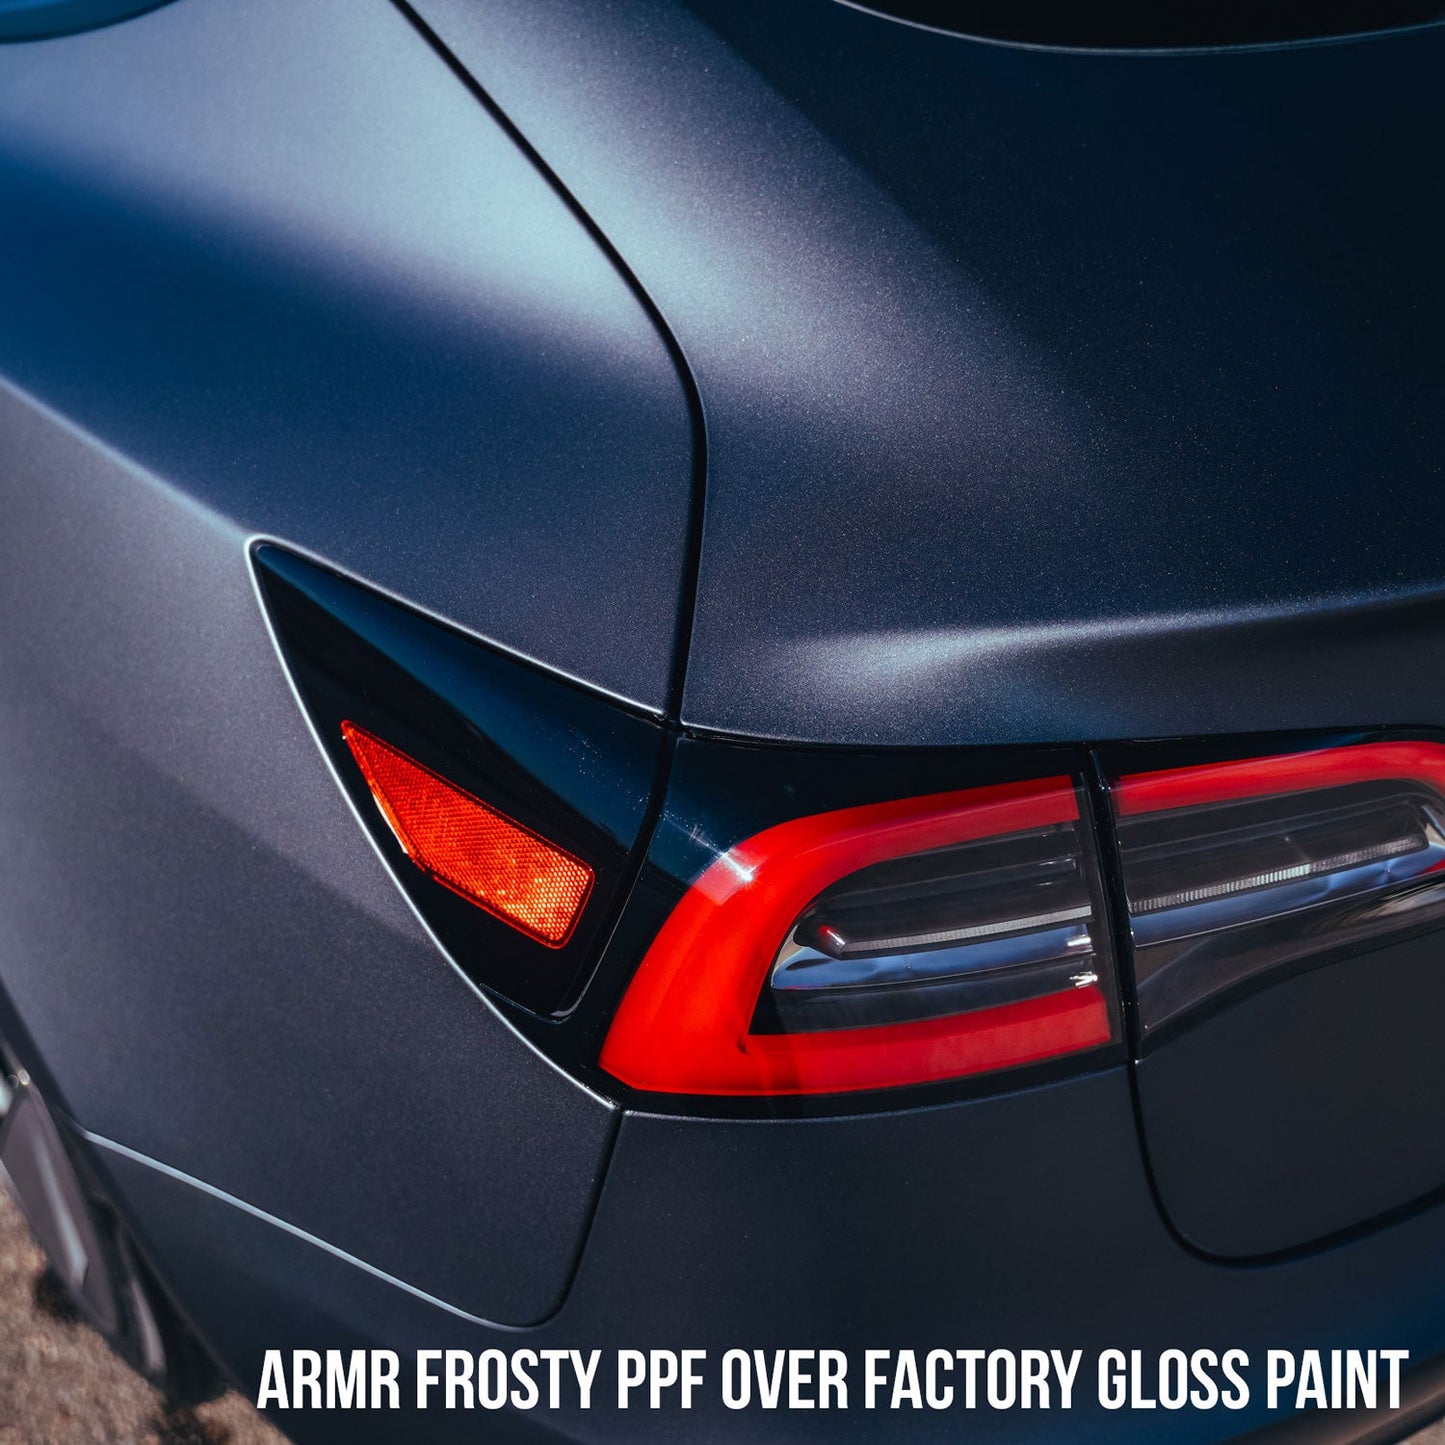 Frosty Paint Protection Film - ARMR PPF